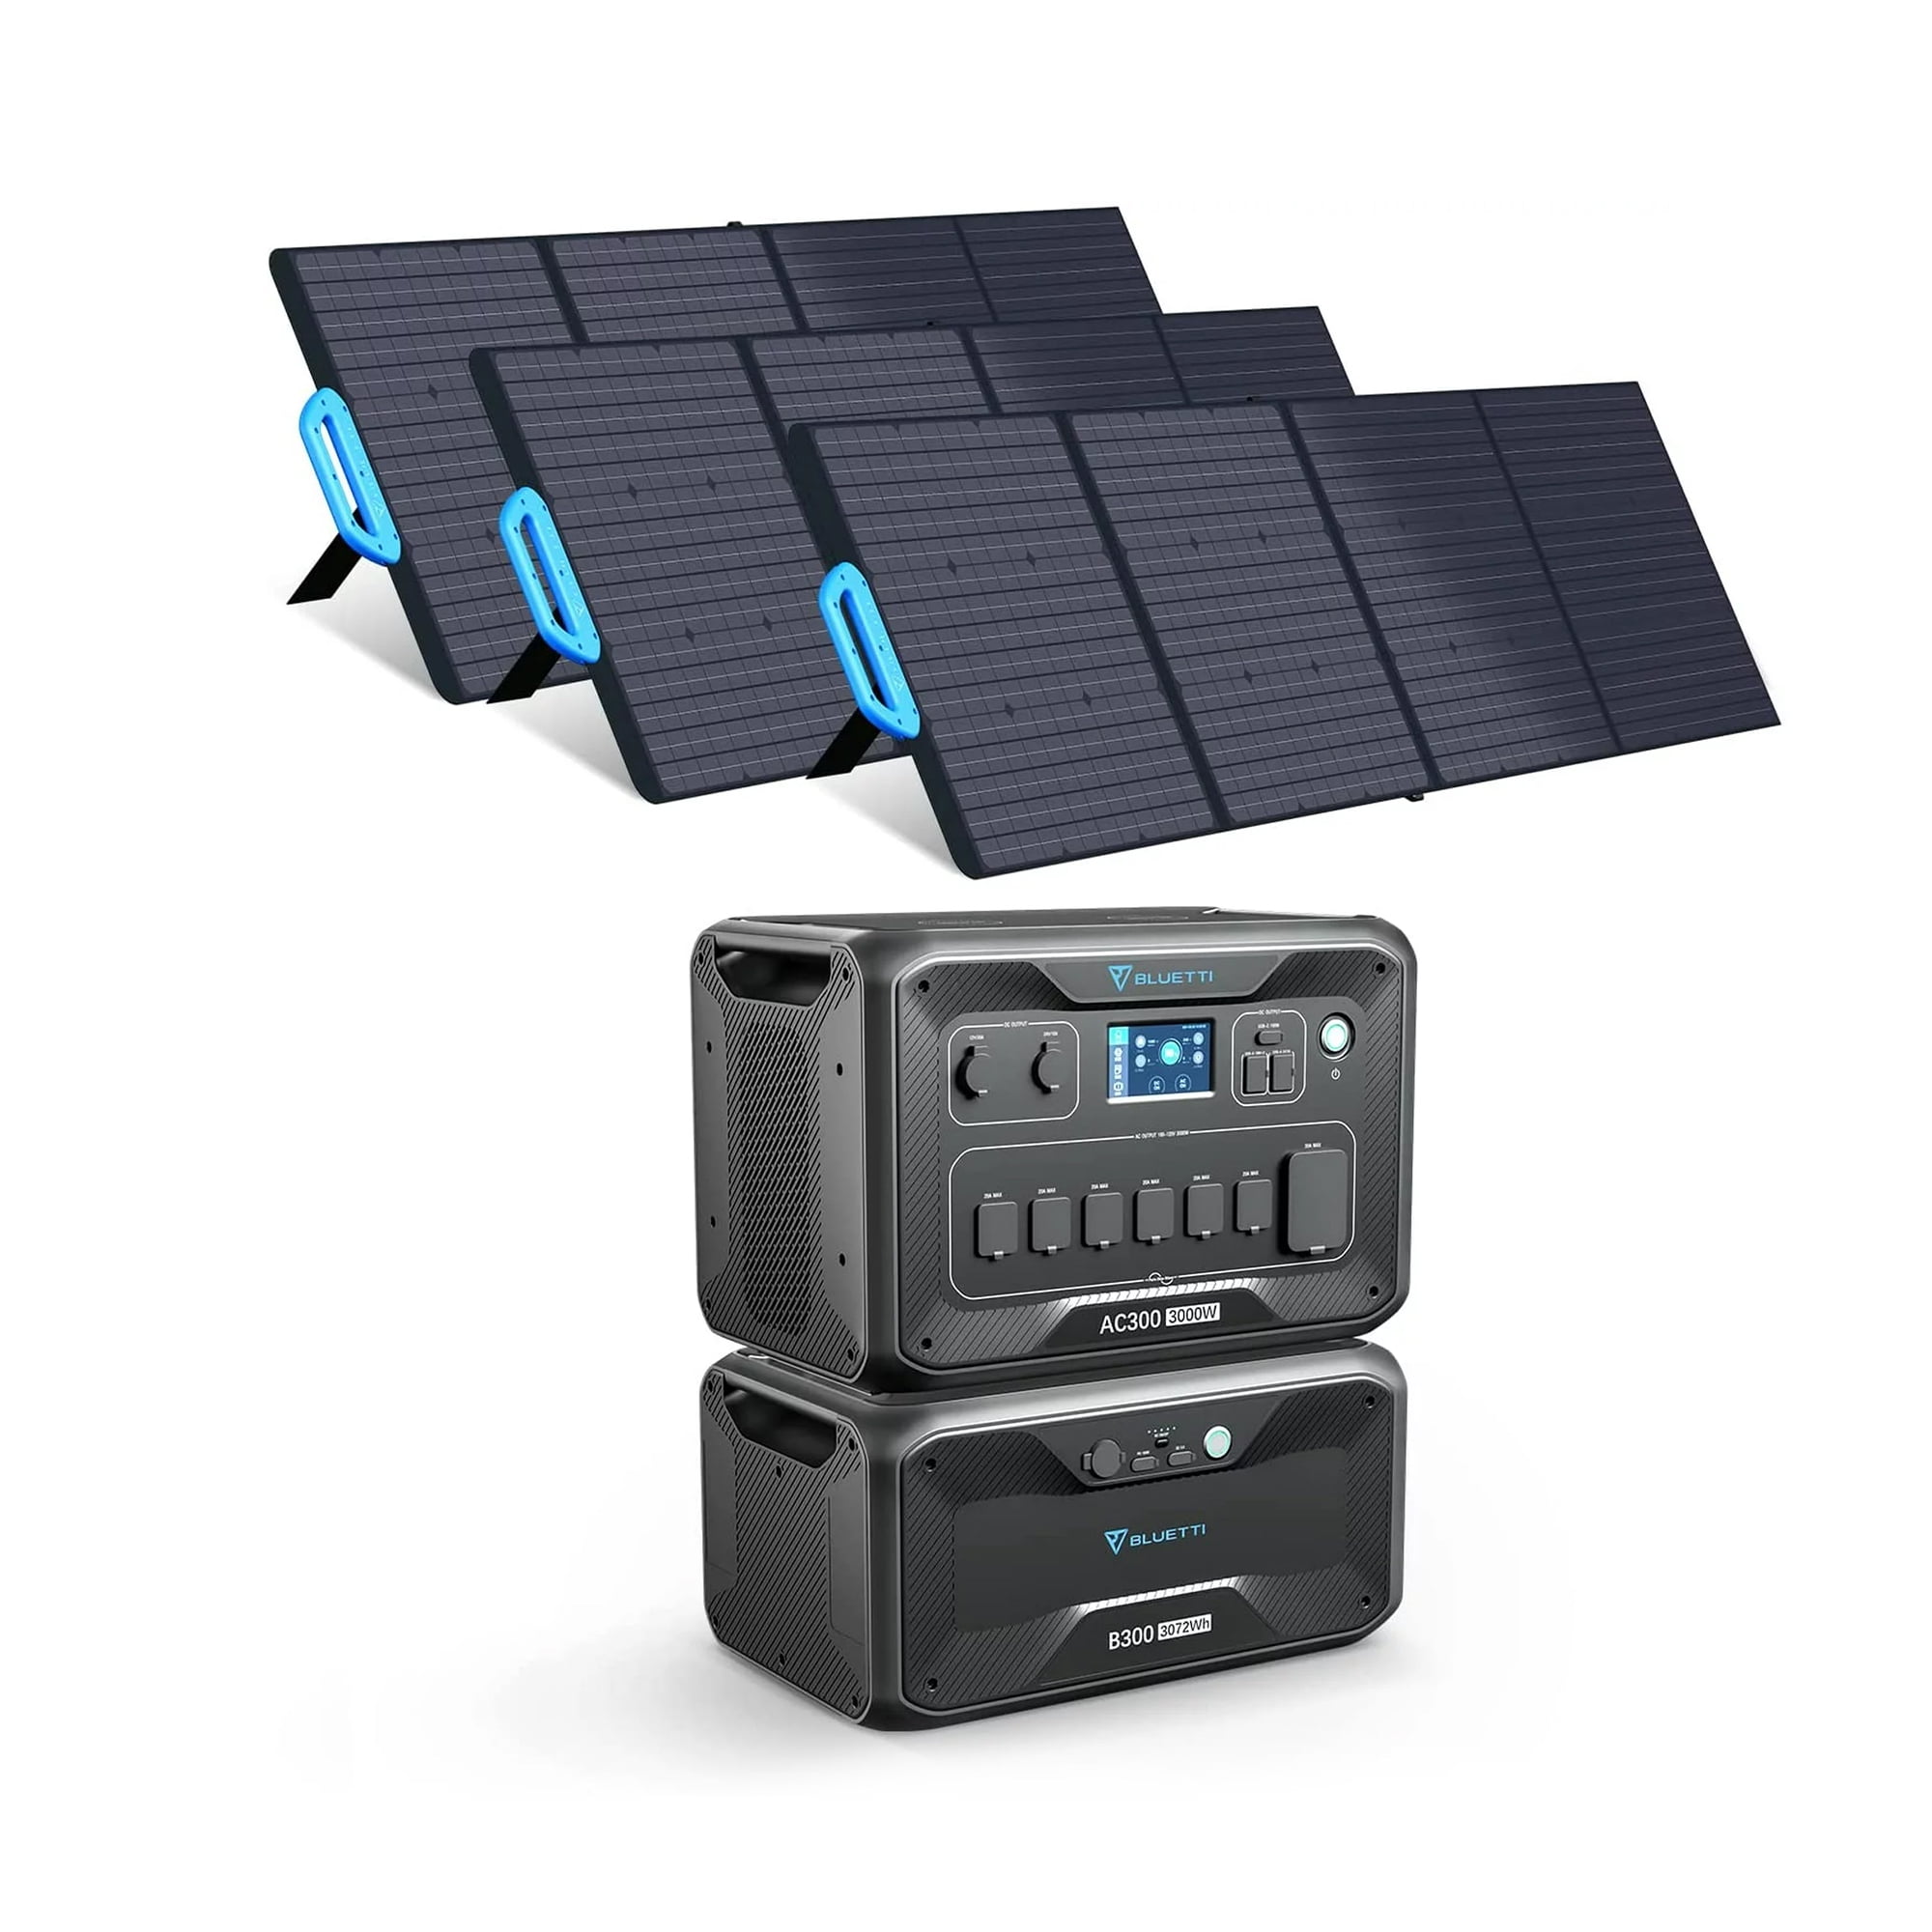 CTECHI Portable Panel Solar Generator 2000w Power Bank 3000w Lithium  Battery 2000wh Portable Power Station